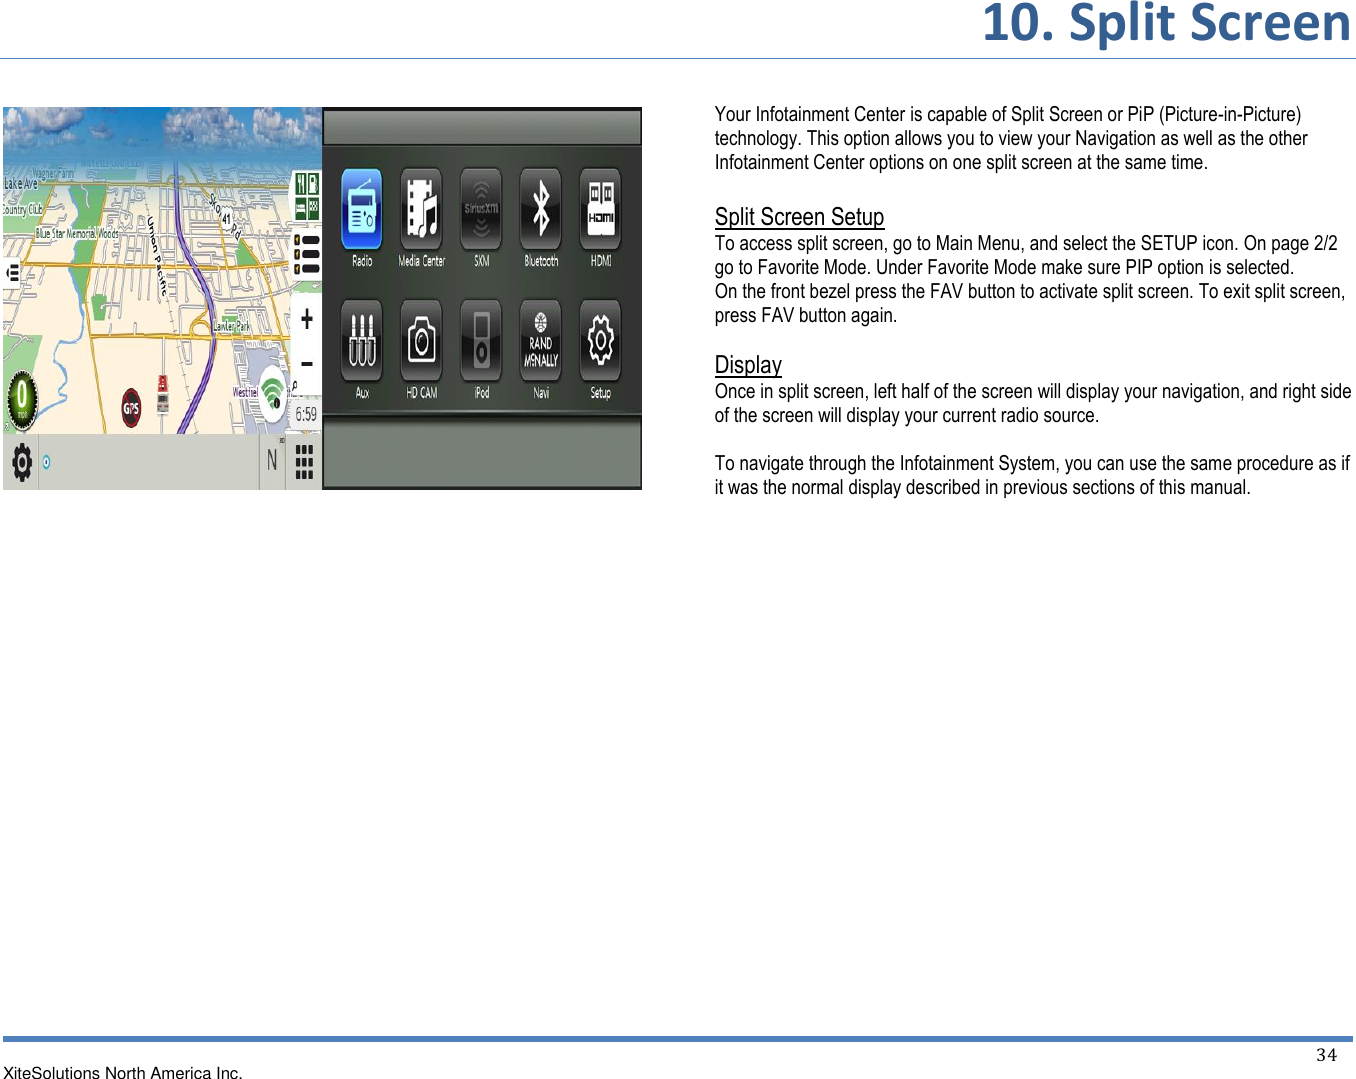       10. Split Screen XiteSolutions North America Inc.    34                             Your Infotainment Center is capable of Split Screen or PiP (Picture-in-Picture) technology. This option allows you to view your Navigation as well as the other Infotainment Center options on one split screen at the same time.  Split Screen Setup To access split screen, go to Main Menu, and select the SETUP icon. On page 2/2 go to Favorite Mode. Under Favorite Mode make sure PIP option is selected. On the front bezel press the FAV button to activate split screen. To exit split screen, press FAV button again.  Display Once in split screen, left half of the screen will display your navigation, and right side of the screen will display your current radio source.  To navigate through the Infotainment System, you can use the same procedure as if it was the normal display described in previous sections of this manual.                  